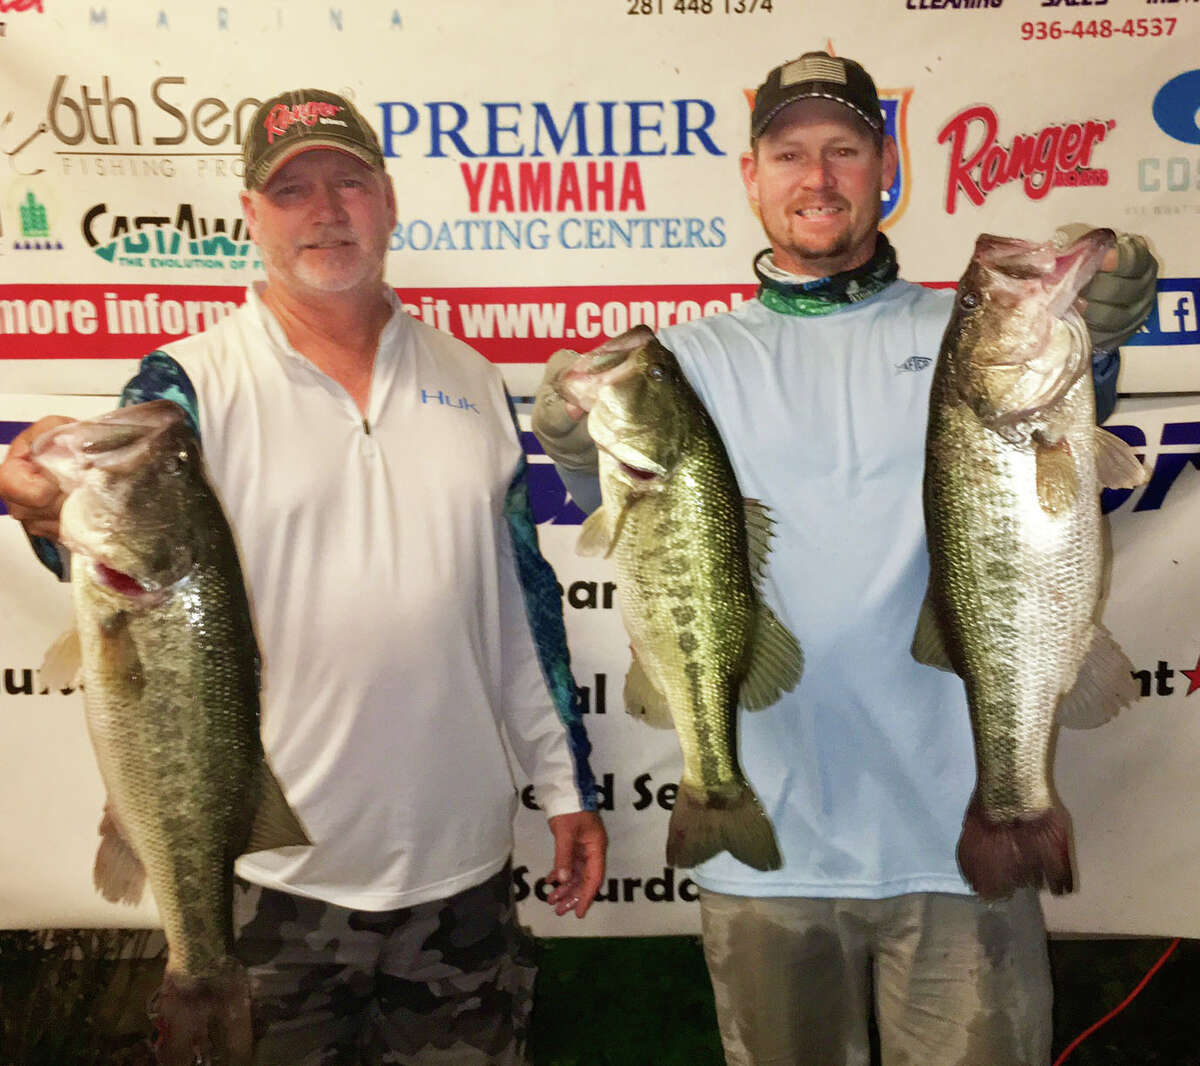 Tim and Evan Carlson came in second place in the CONROEBASS Tuesday Night Tournament with a stringer weight of 14.75 pounds.